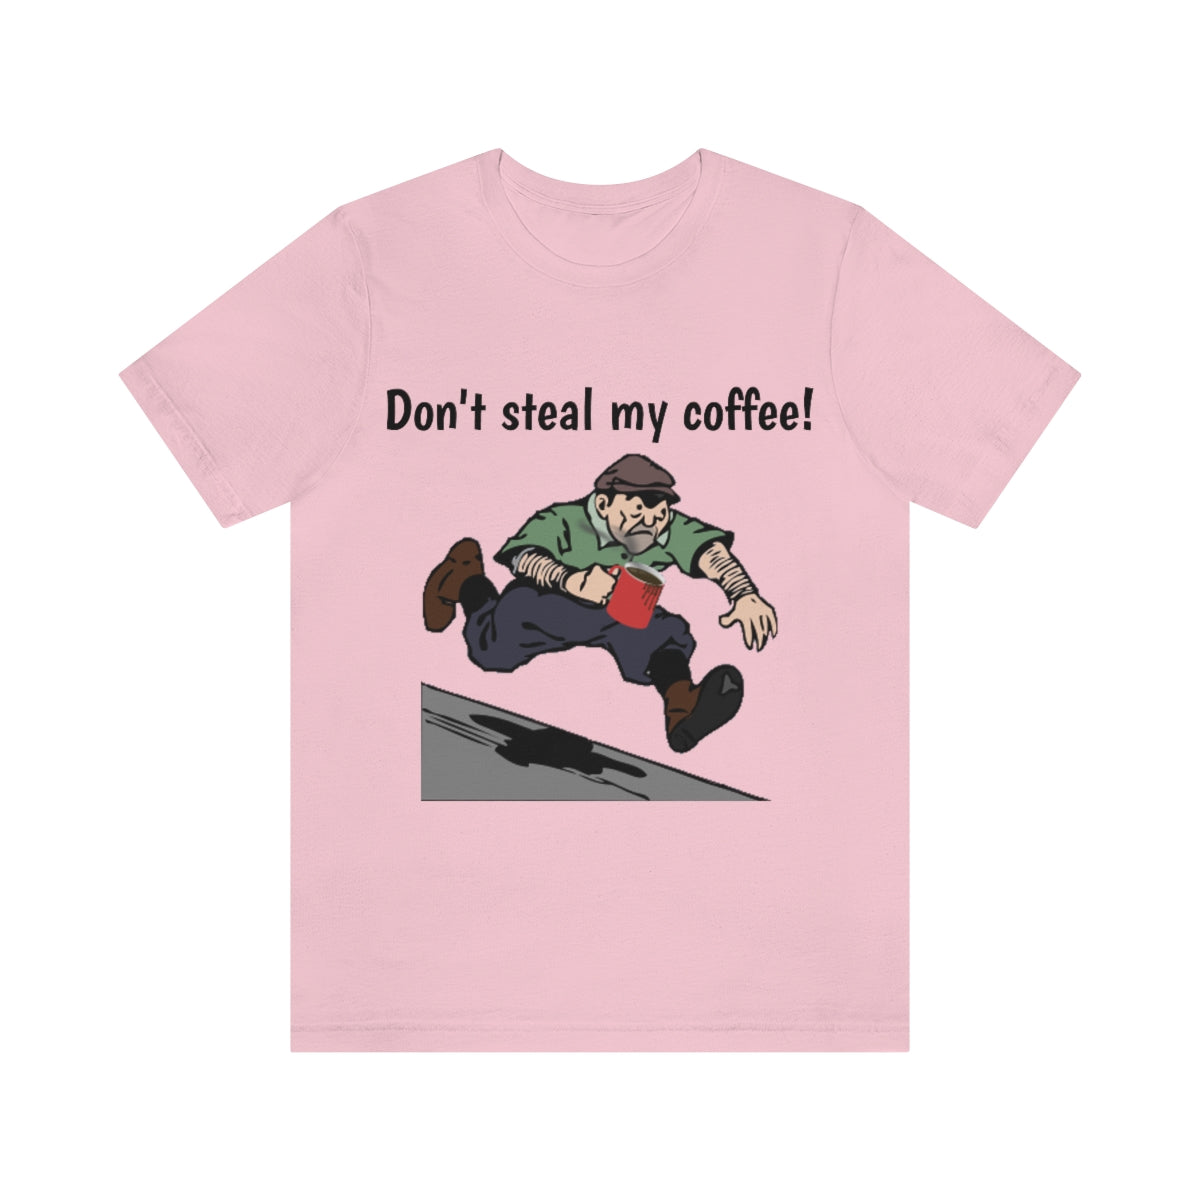 Don't steal my coffee! - Funny Unisex Short Sleeve Tee - CrazyTomTShirts